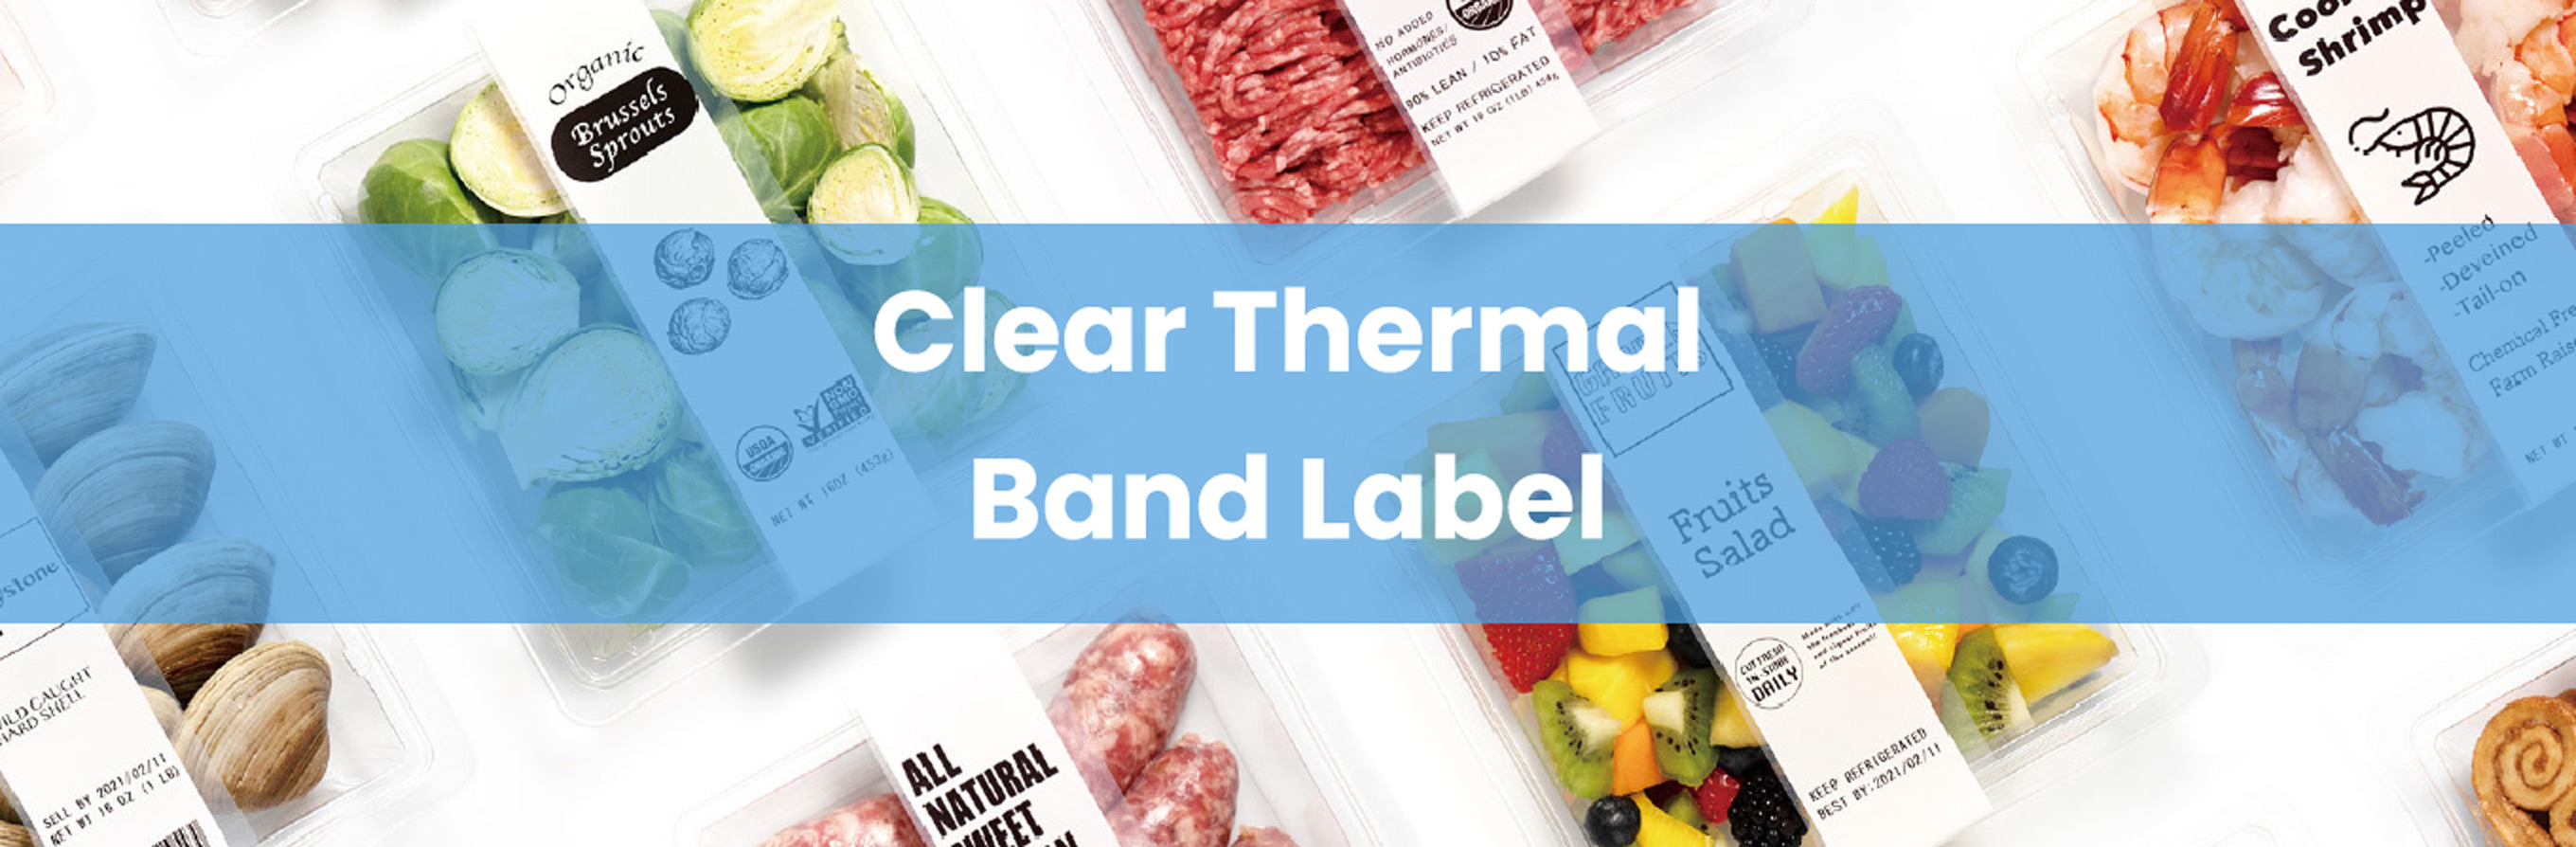 Clear Thermal Wrapping Band Label